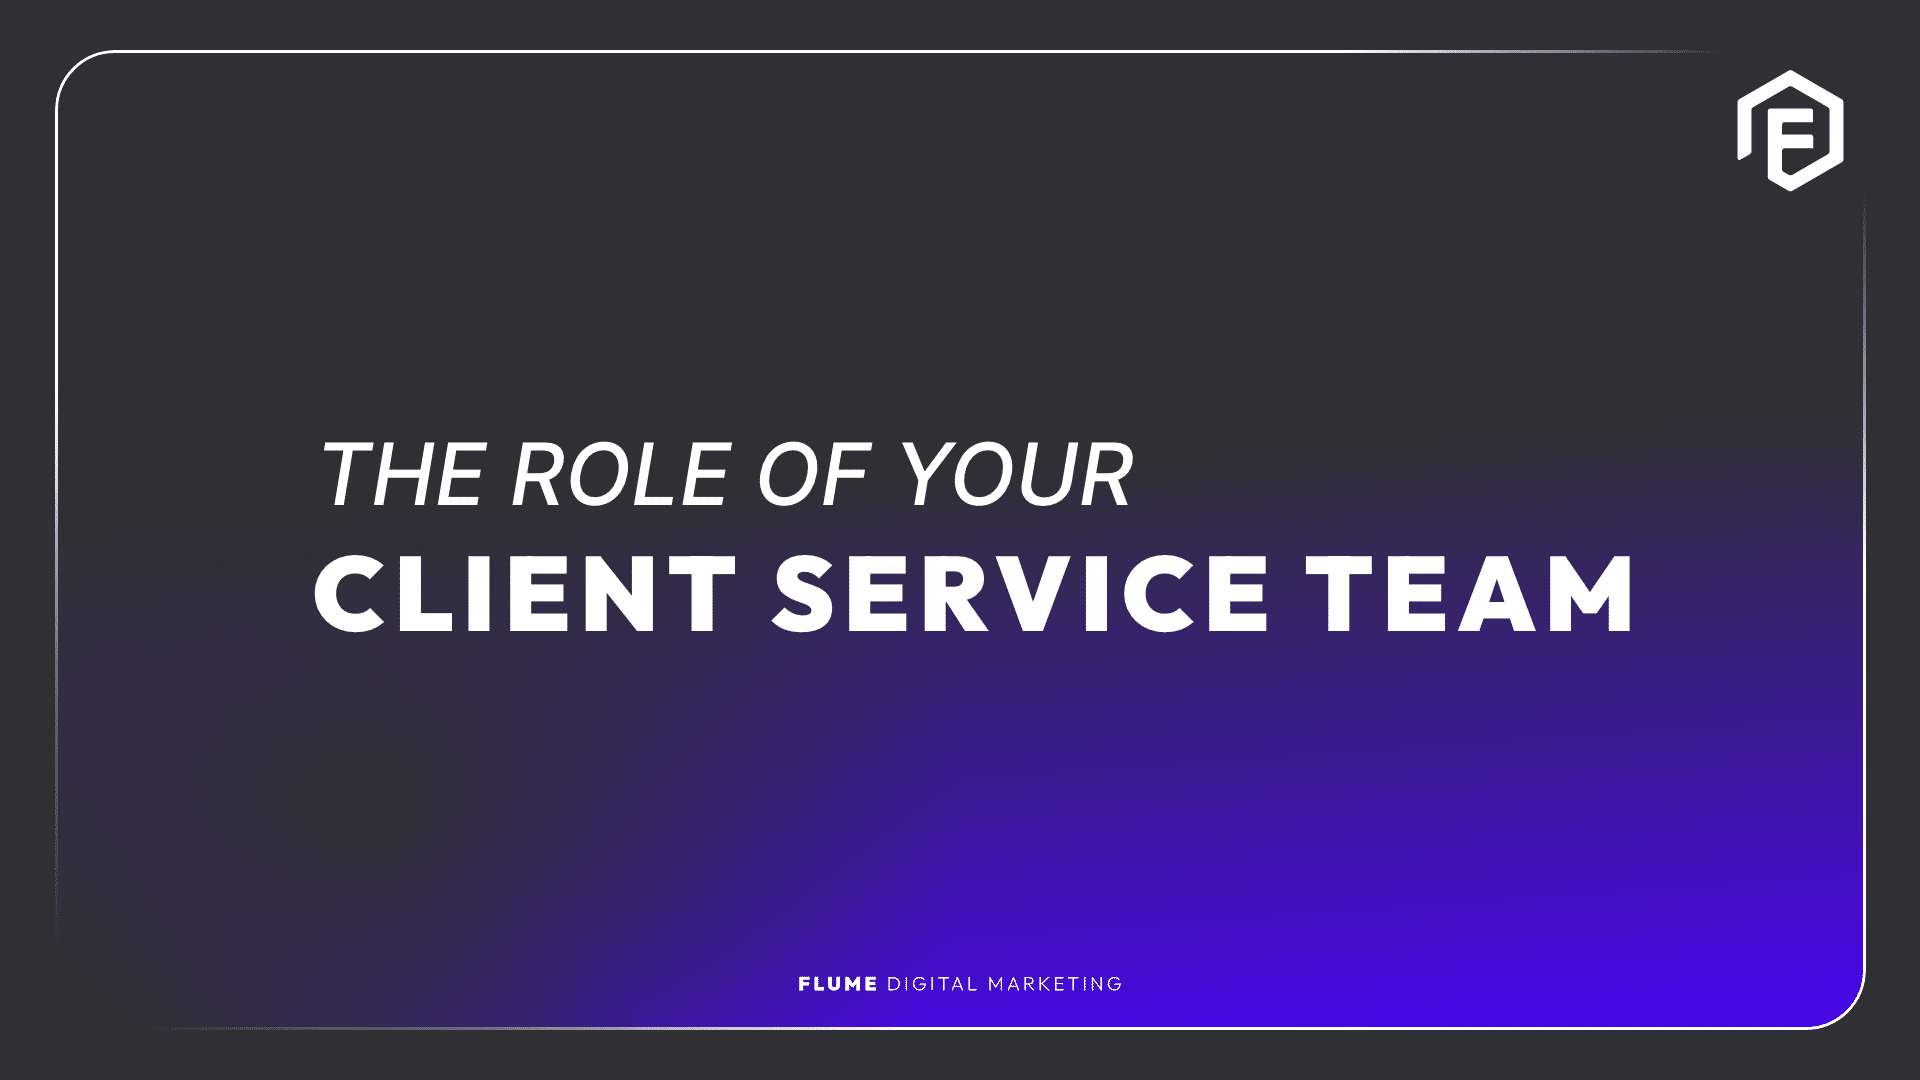 The role of your cleitn service team